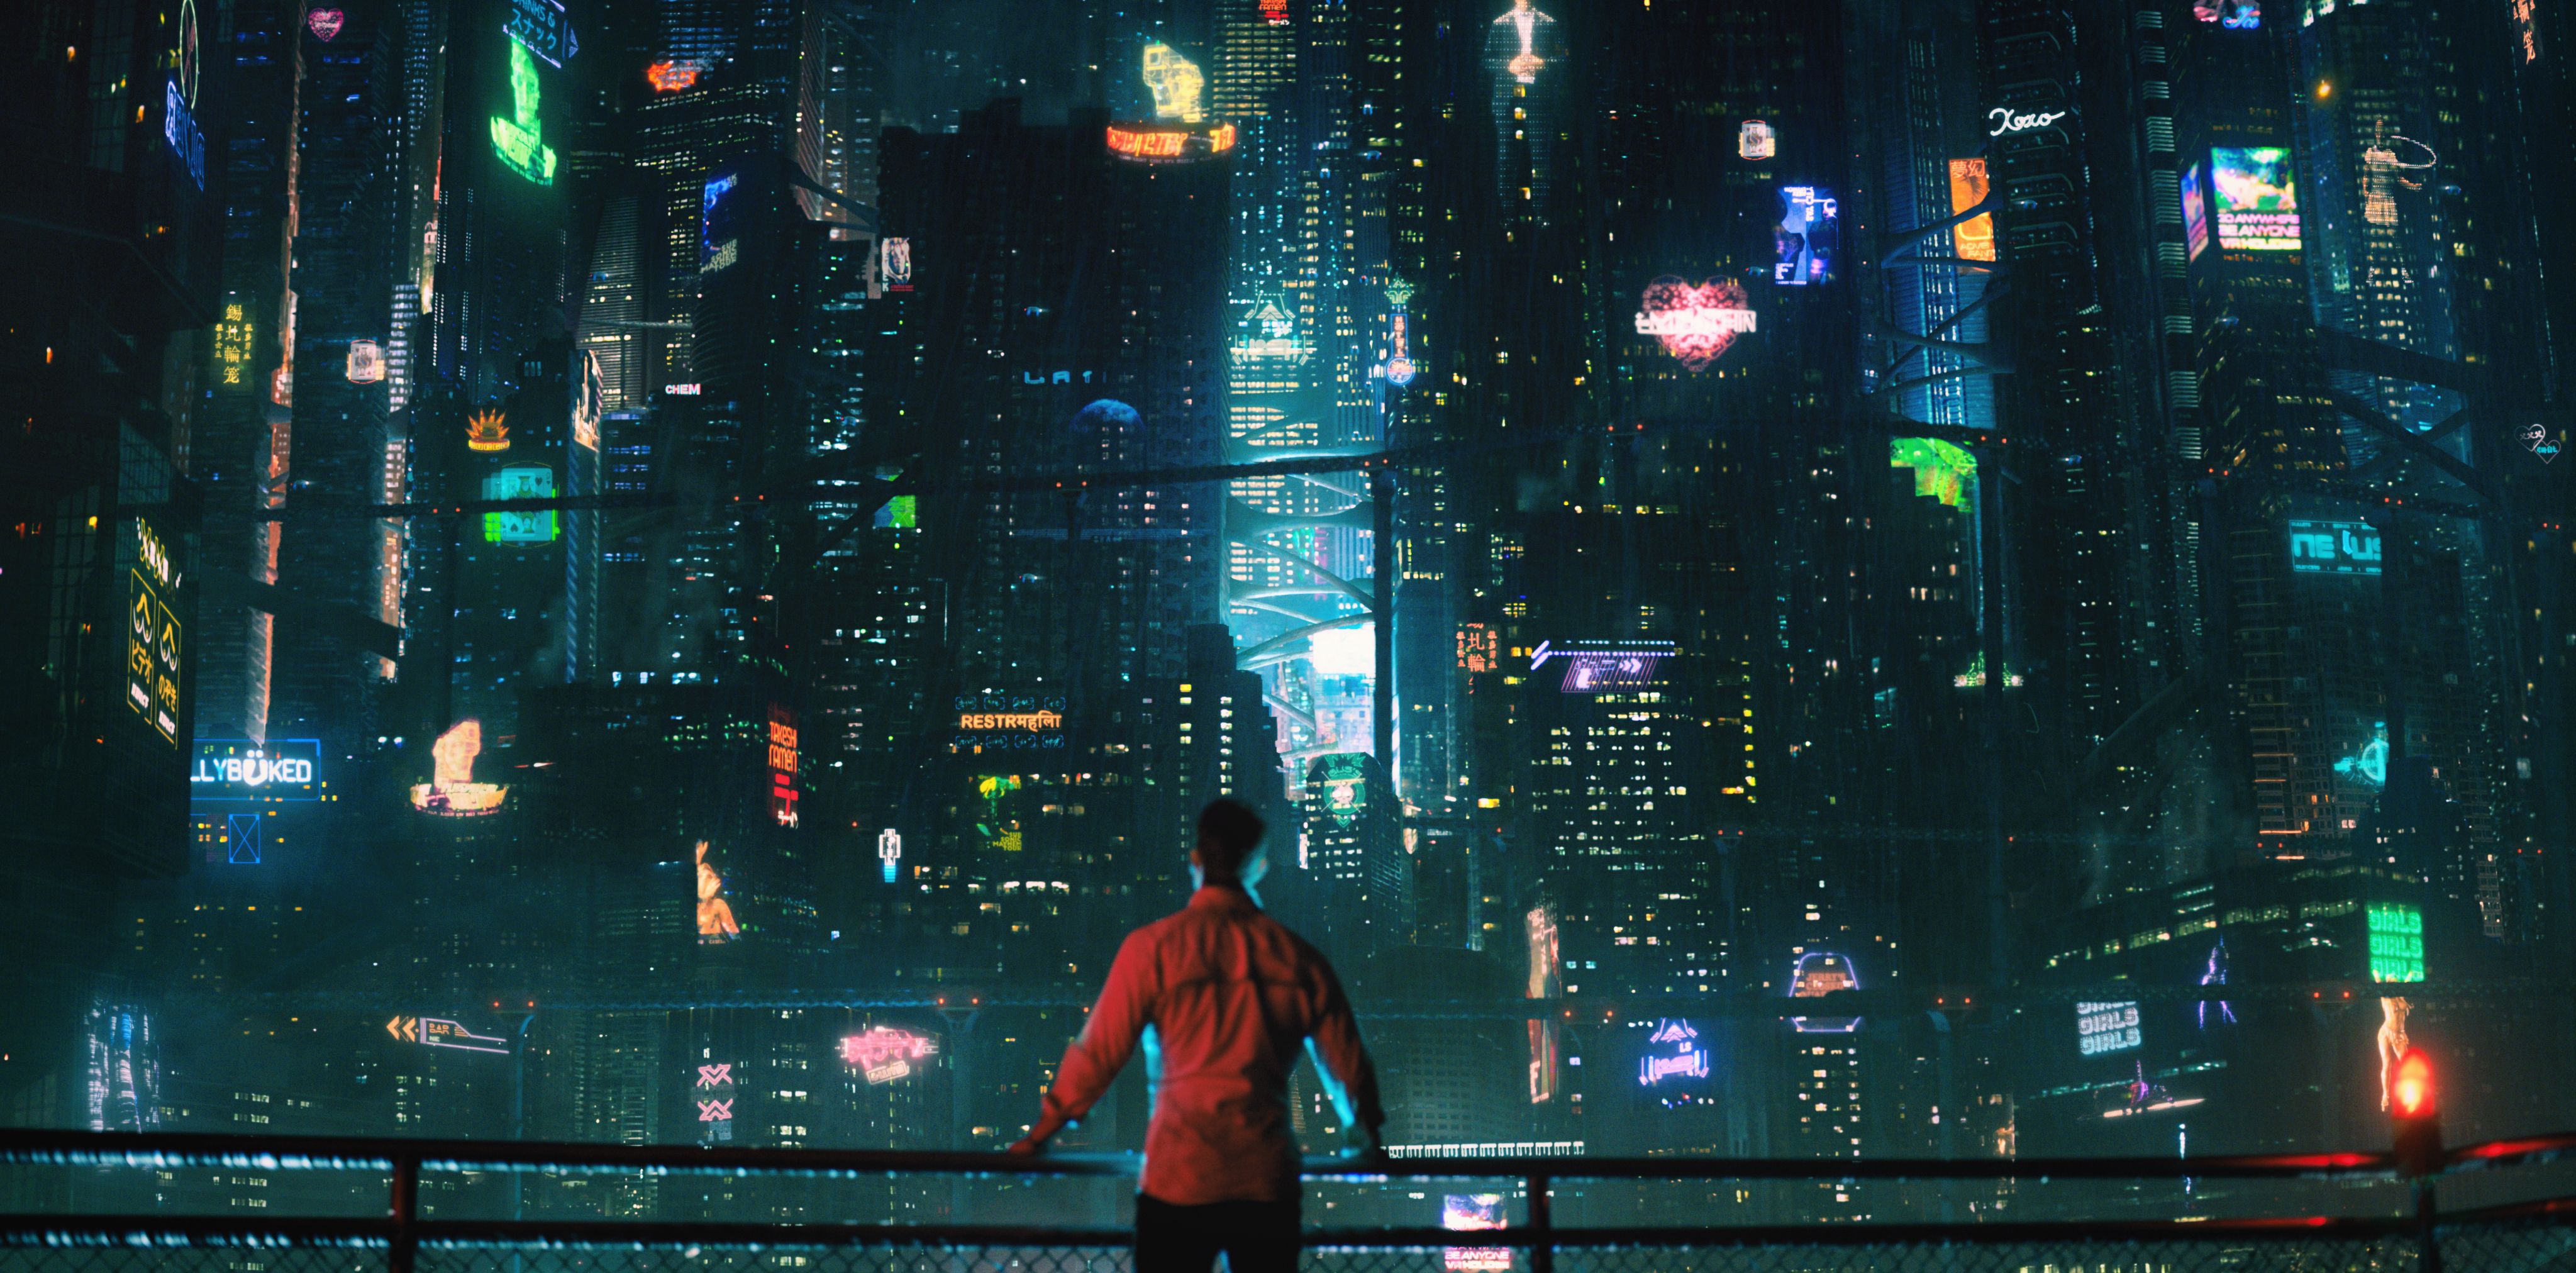 Altered Carbon Netflix Tv Series HD Tv Shows, 4k Wallpaper, Image, Background, Photo and Picture